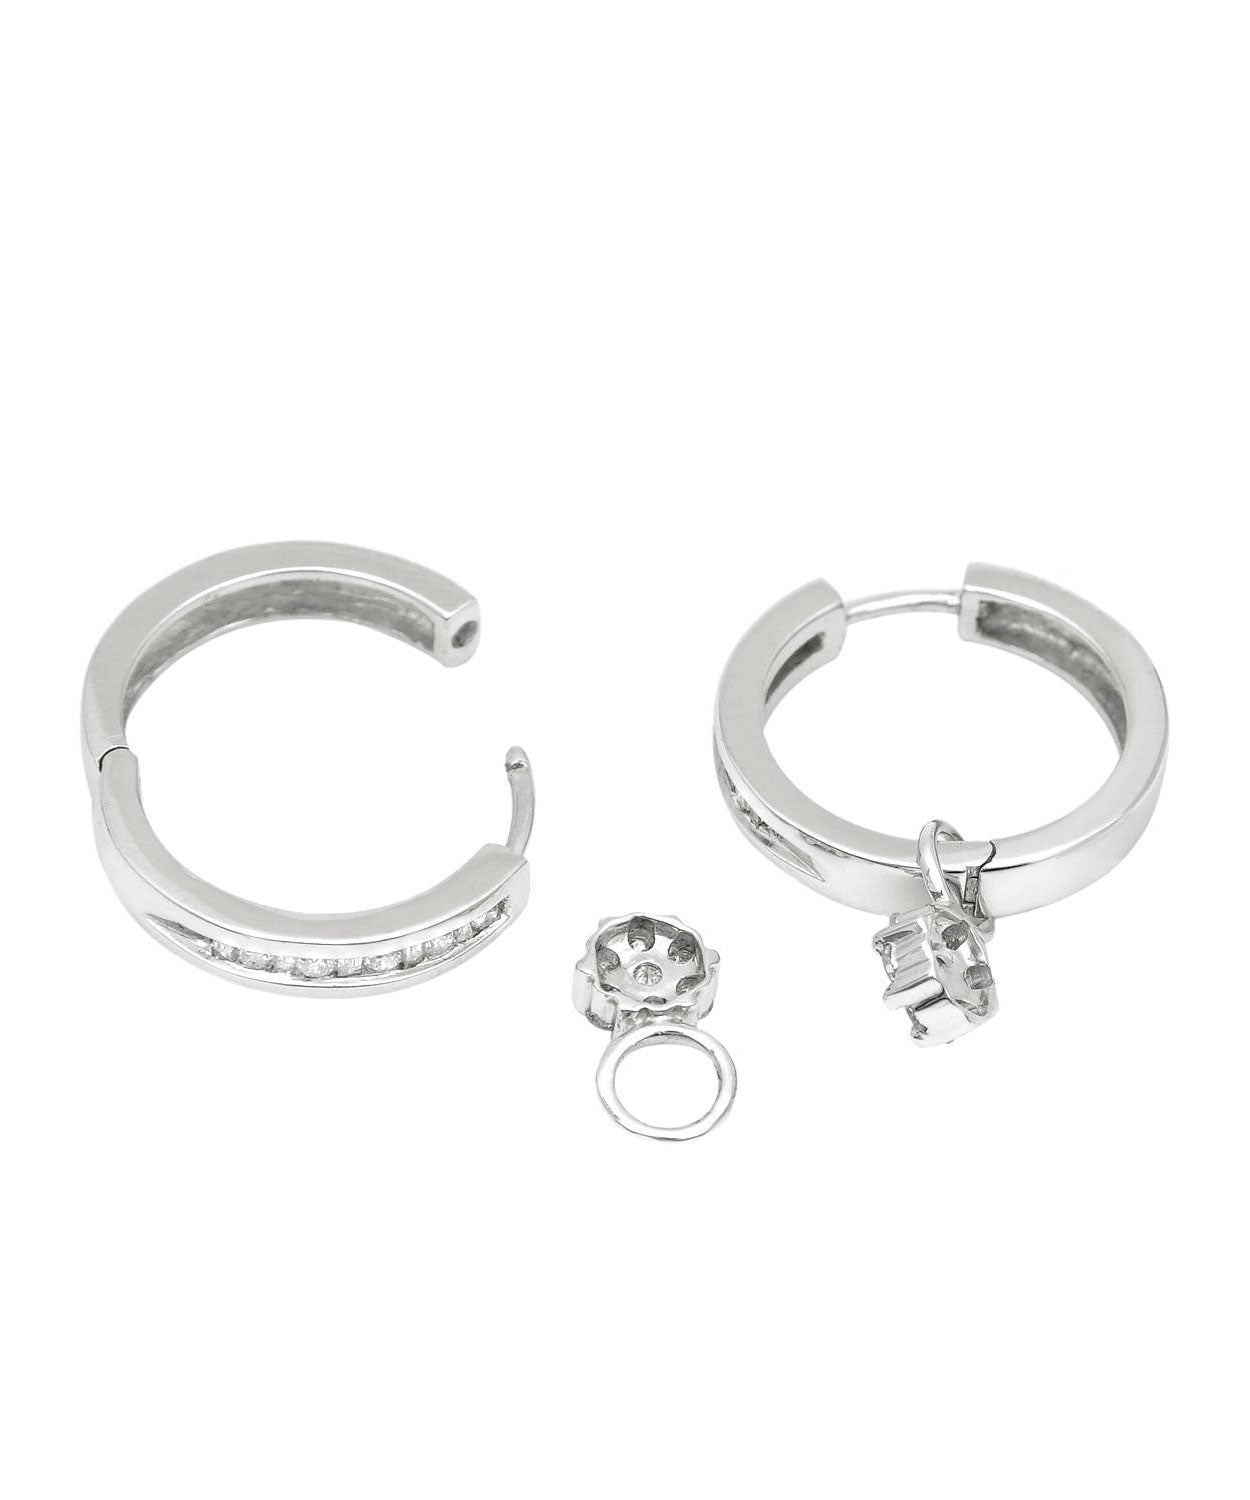 0.50 ctw Diamond 14k White Gold Hoop Earrings with Charm View 2